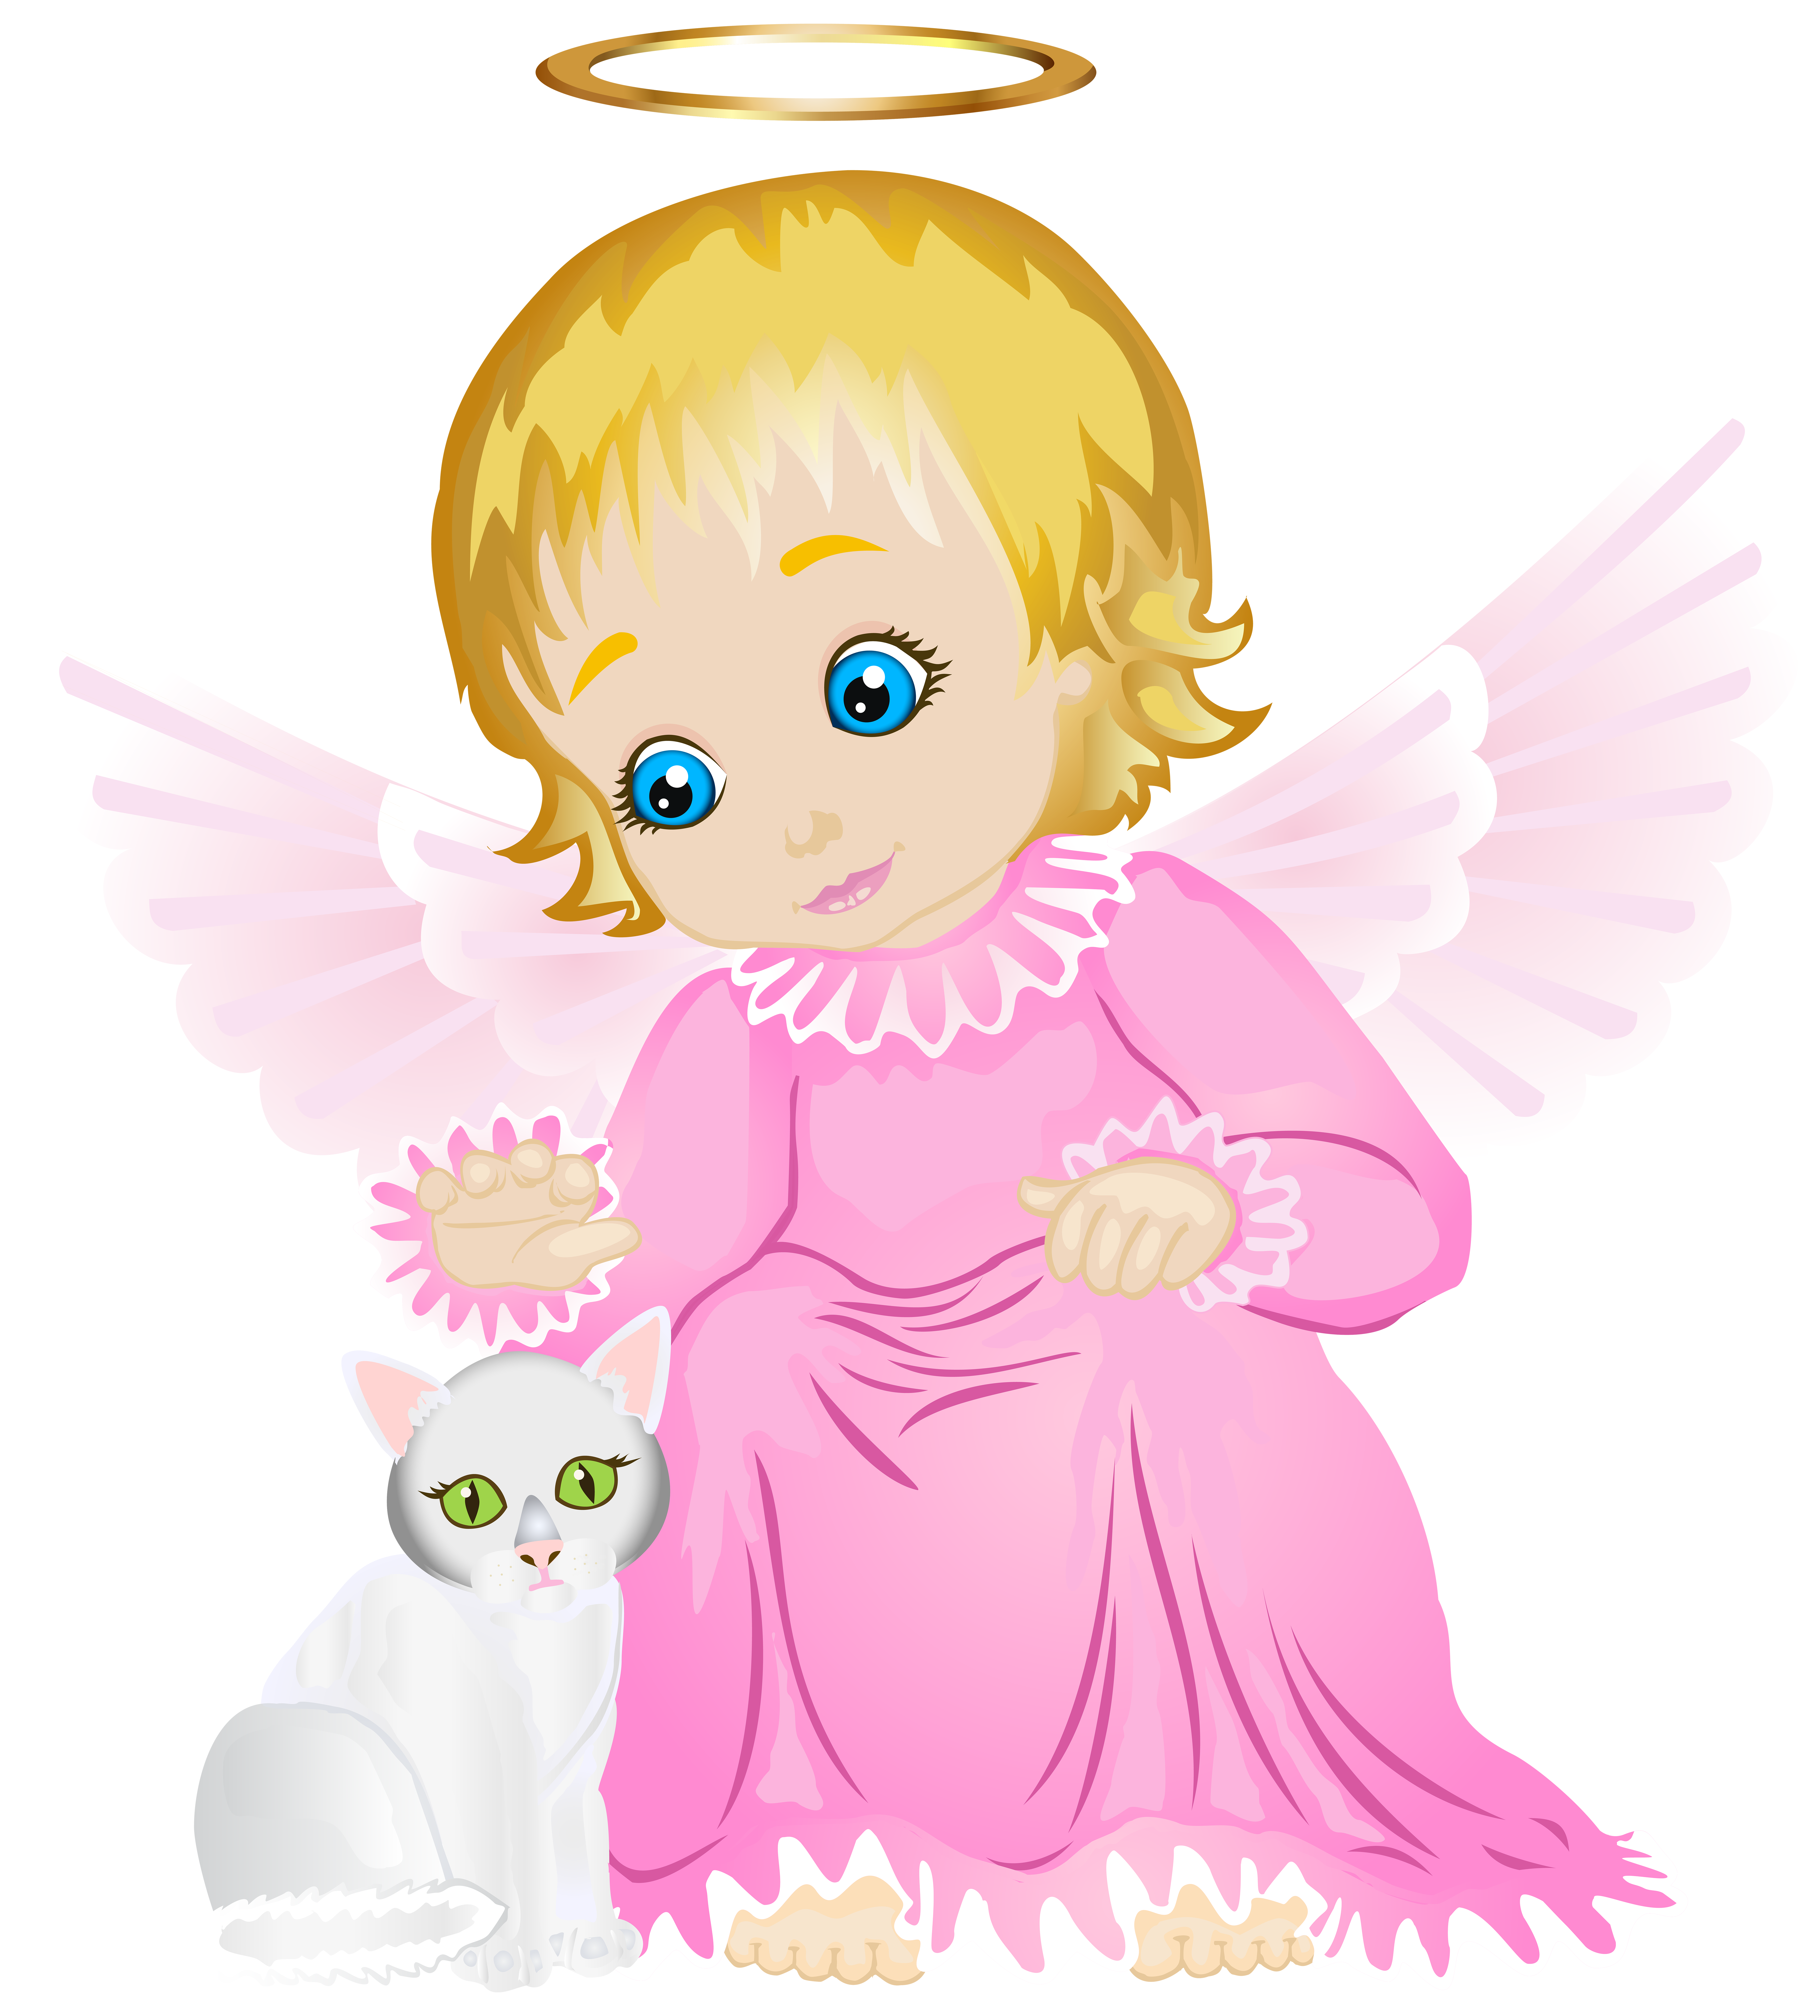 Cute Angel with White Kitten Transparent PNG Clip Art Image.